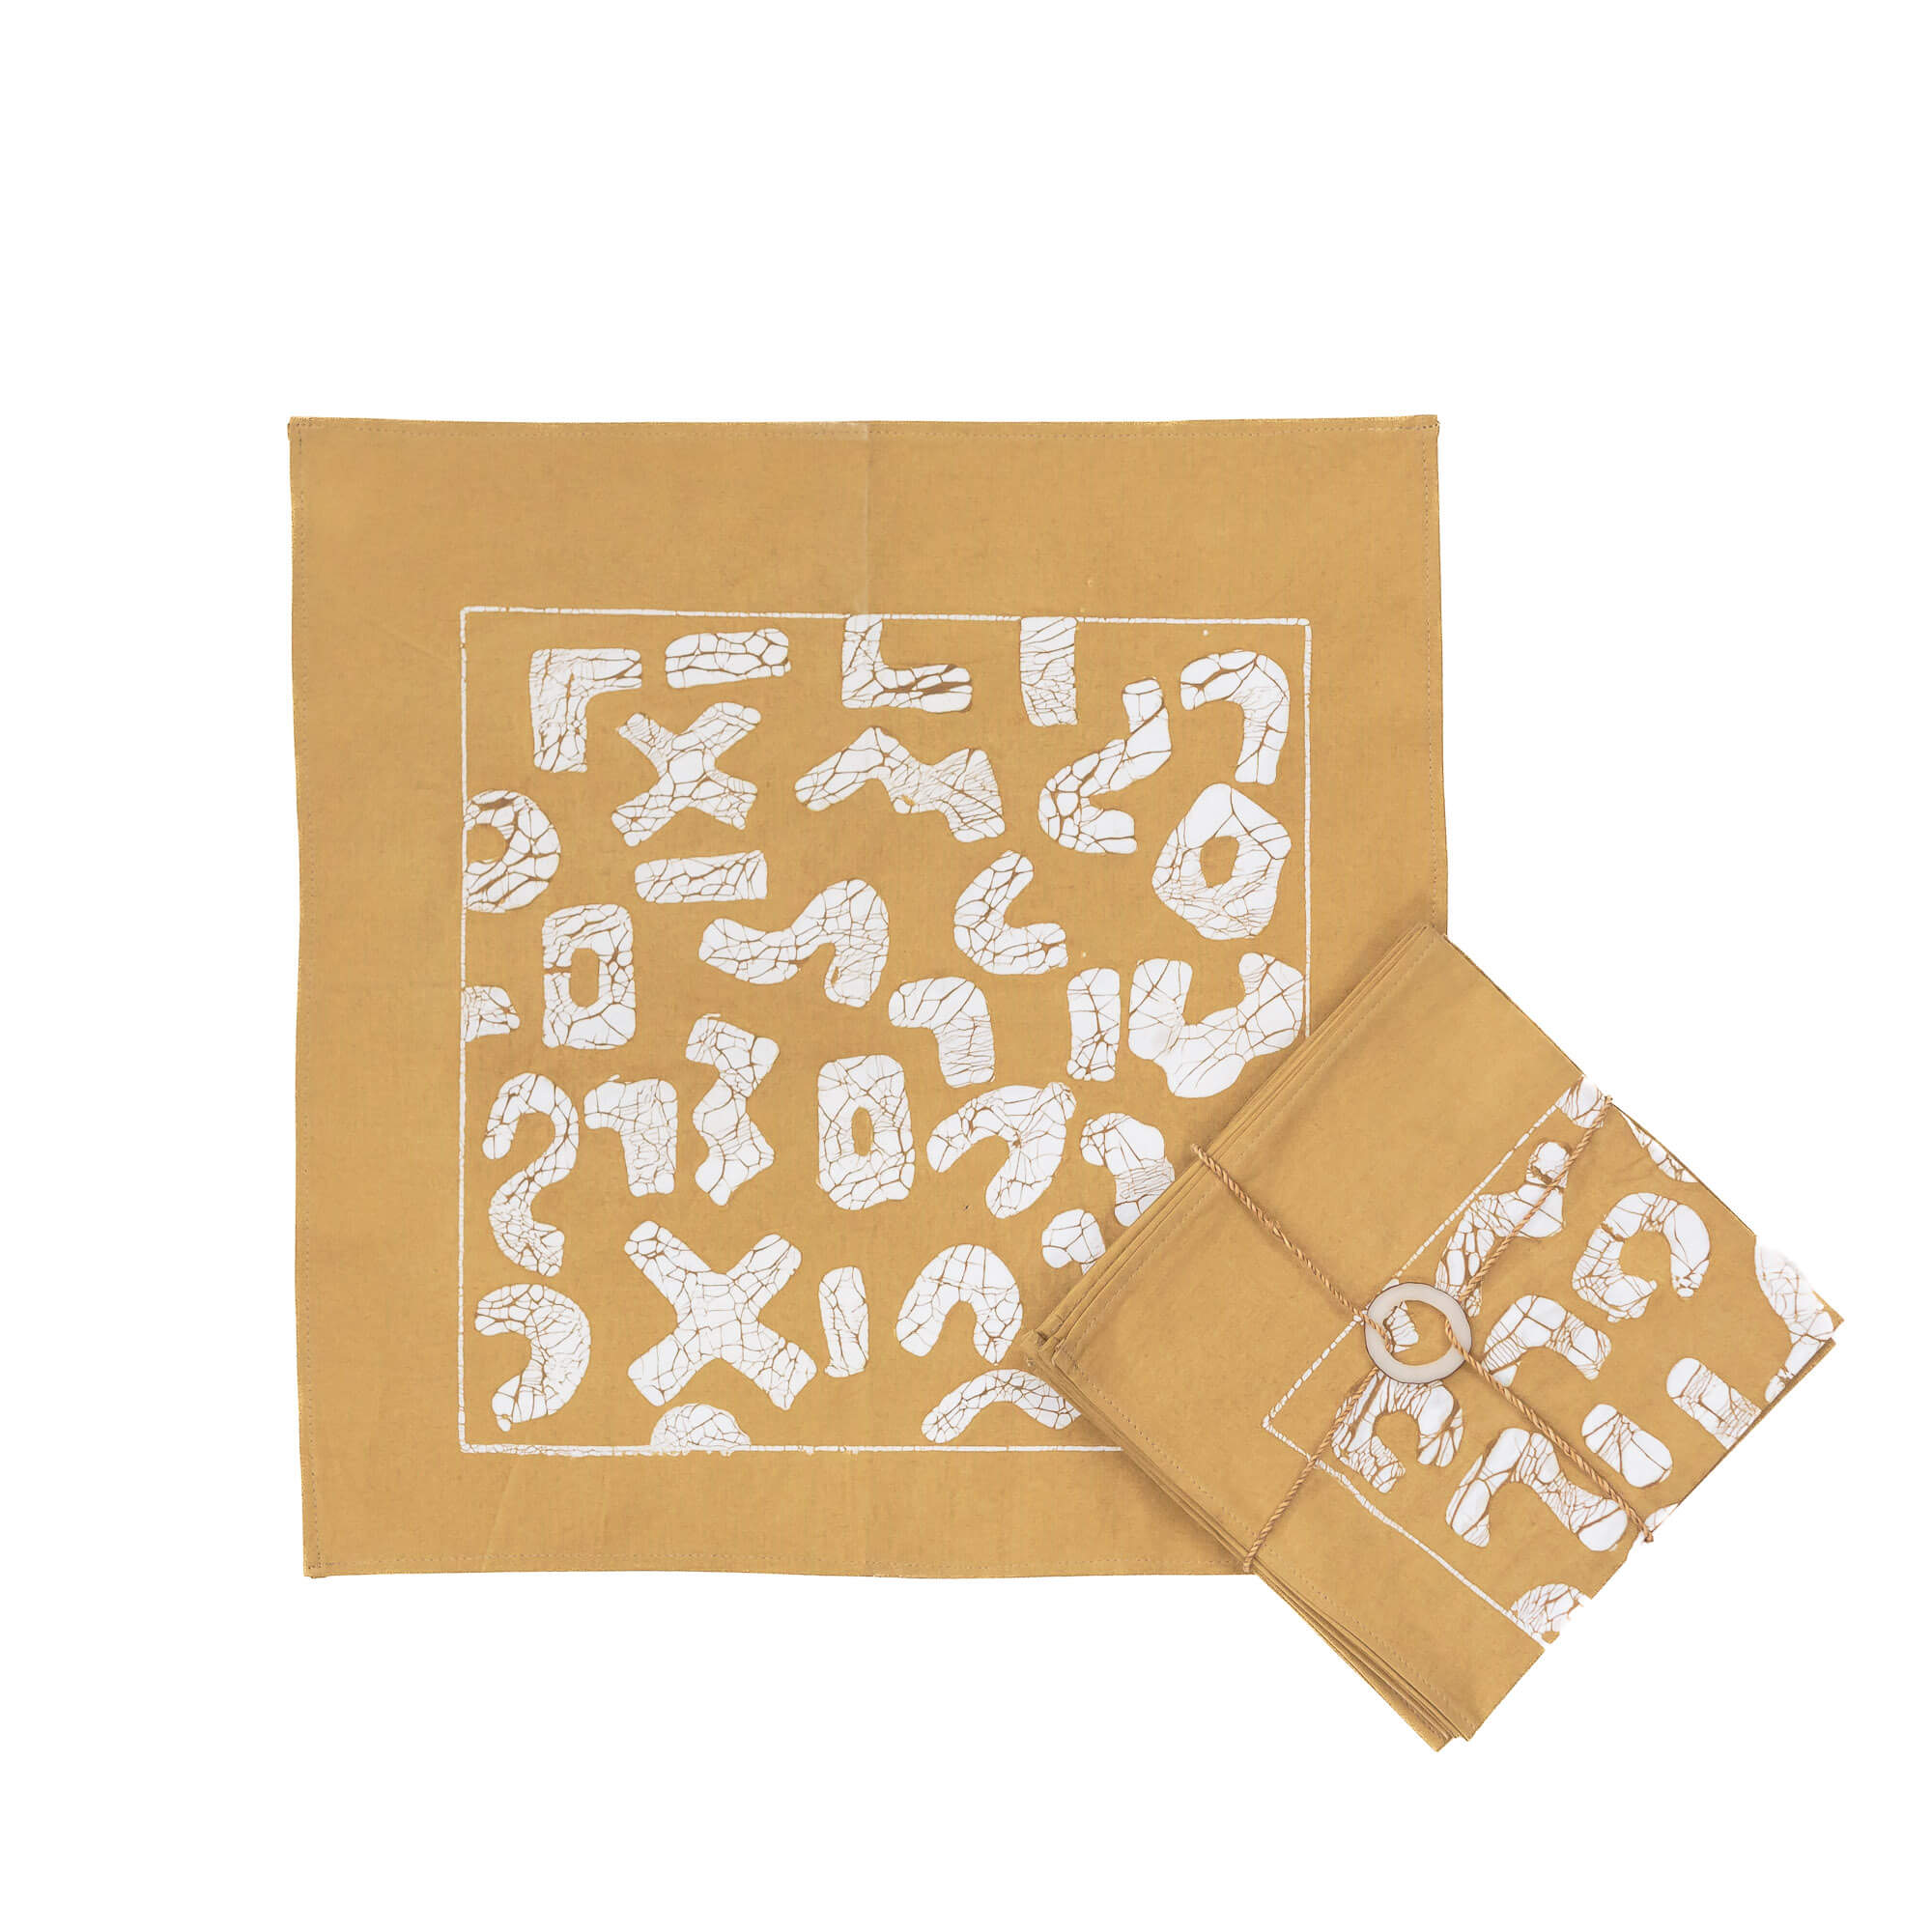 The perfect mustard yellow napkins adorned with a squiggle pattern.